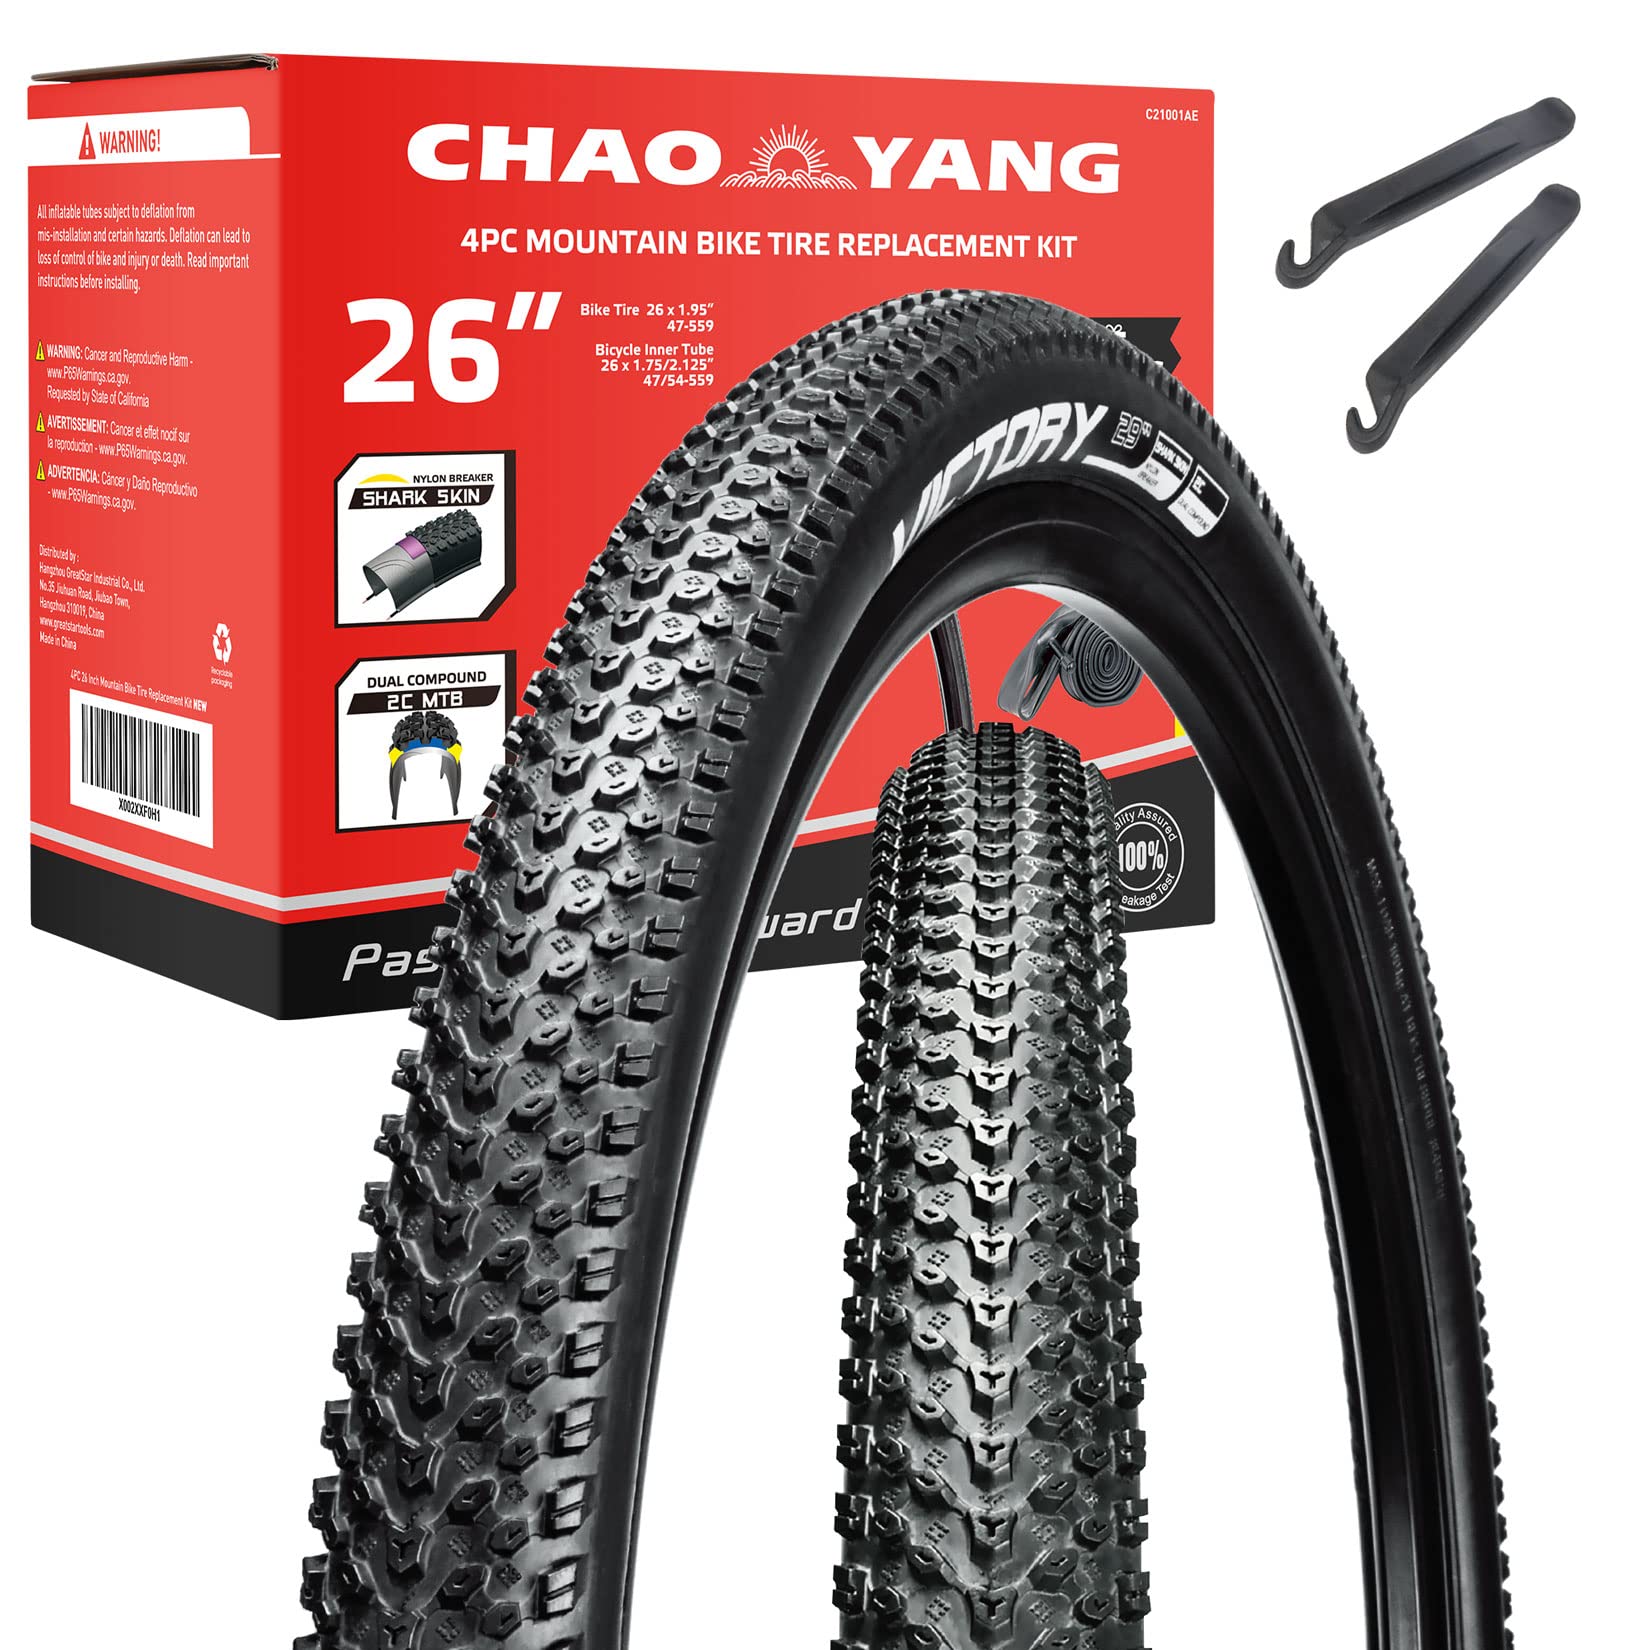 Chao YANG Mountain Bike Tire Replacement Kit, 261.95, Dual Compound 2C-MTB  Tires, Featured with Double